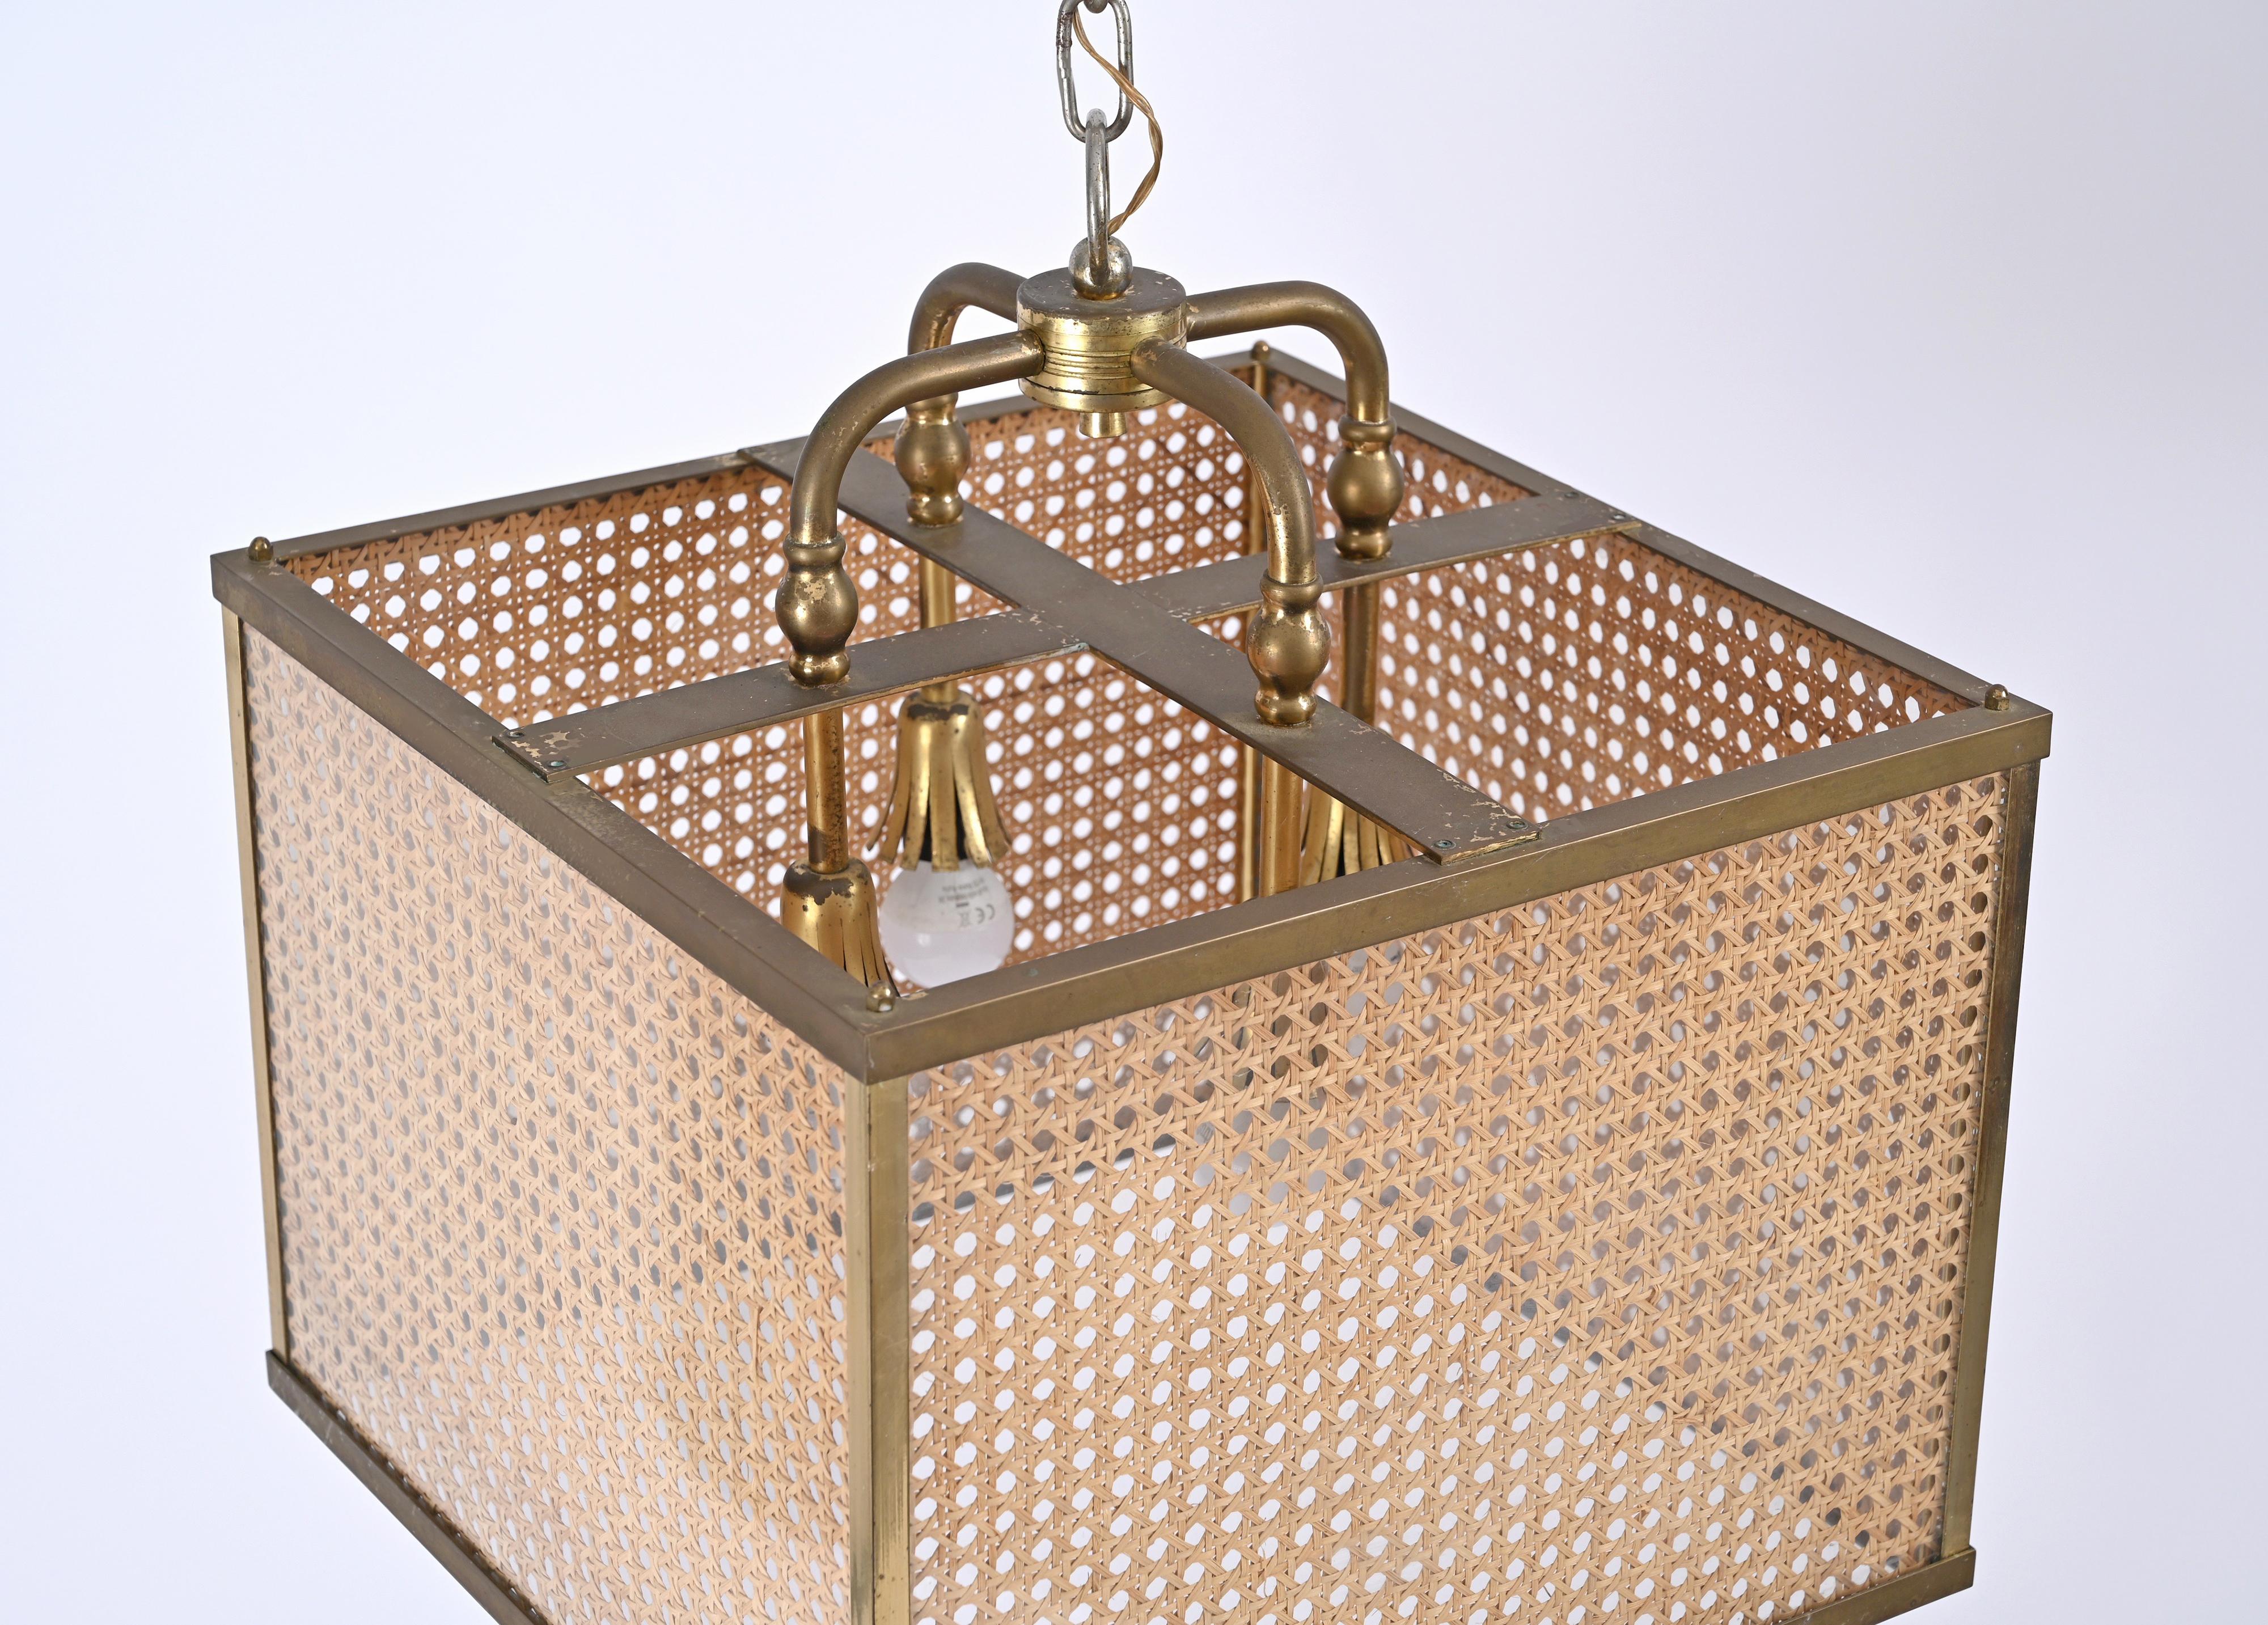 Brass, Vienna Straw Wicker and Glass Square Chandelier Lamp, Italy, 1950s For Sale 7